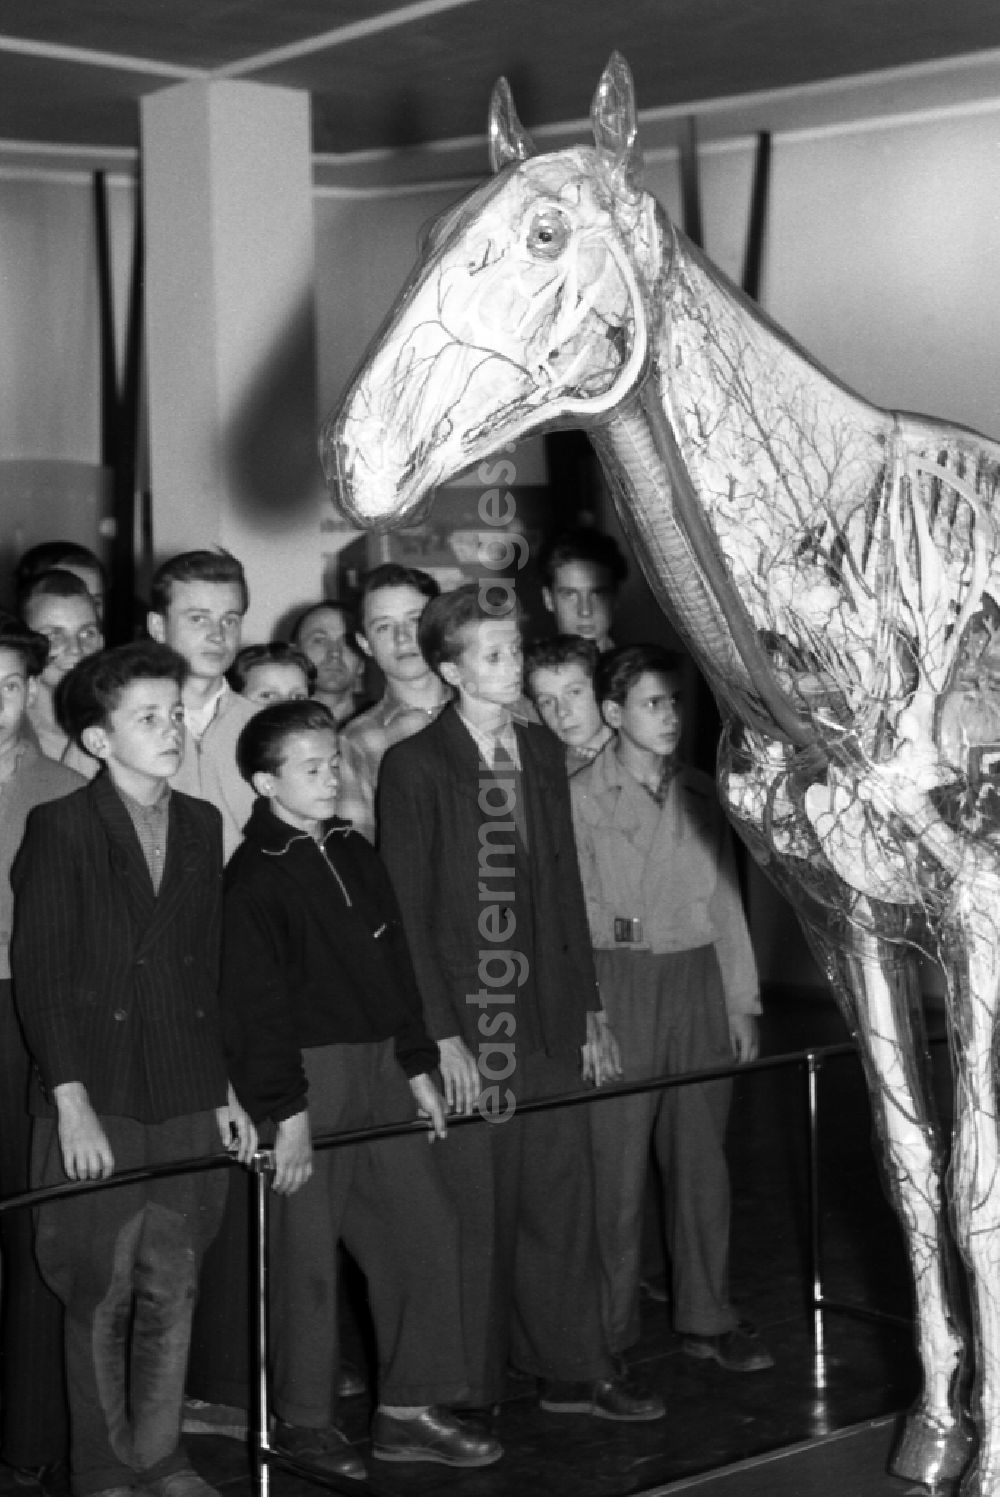 GDR picture archive: Dresden - School class visit the Glass Horse in the German Hygiene Museum in Dresden in the state Saxony on the territory of the former GDR, German Democratic Republic. The Glass Horse was developed under the direction of Prof. Dr. med. vet. habil. Erich Schwarze